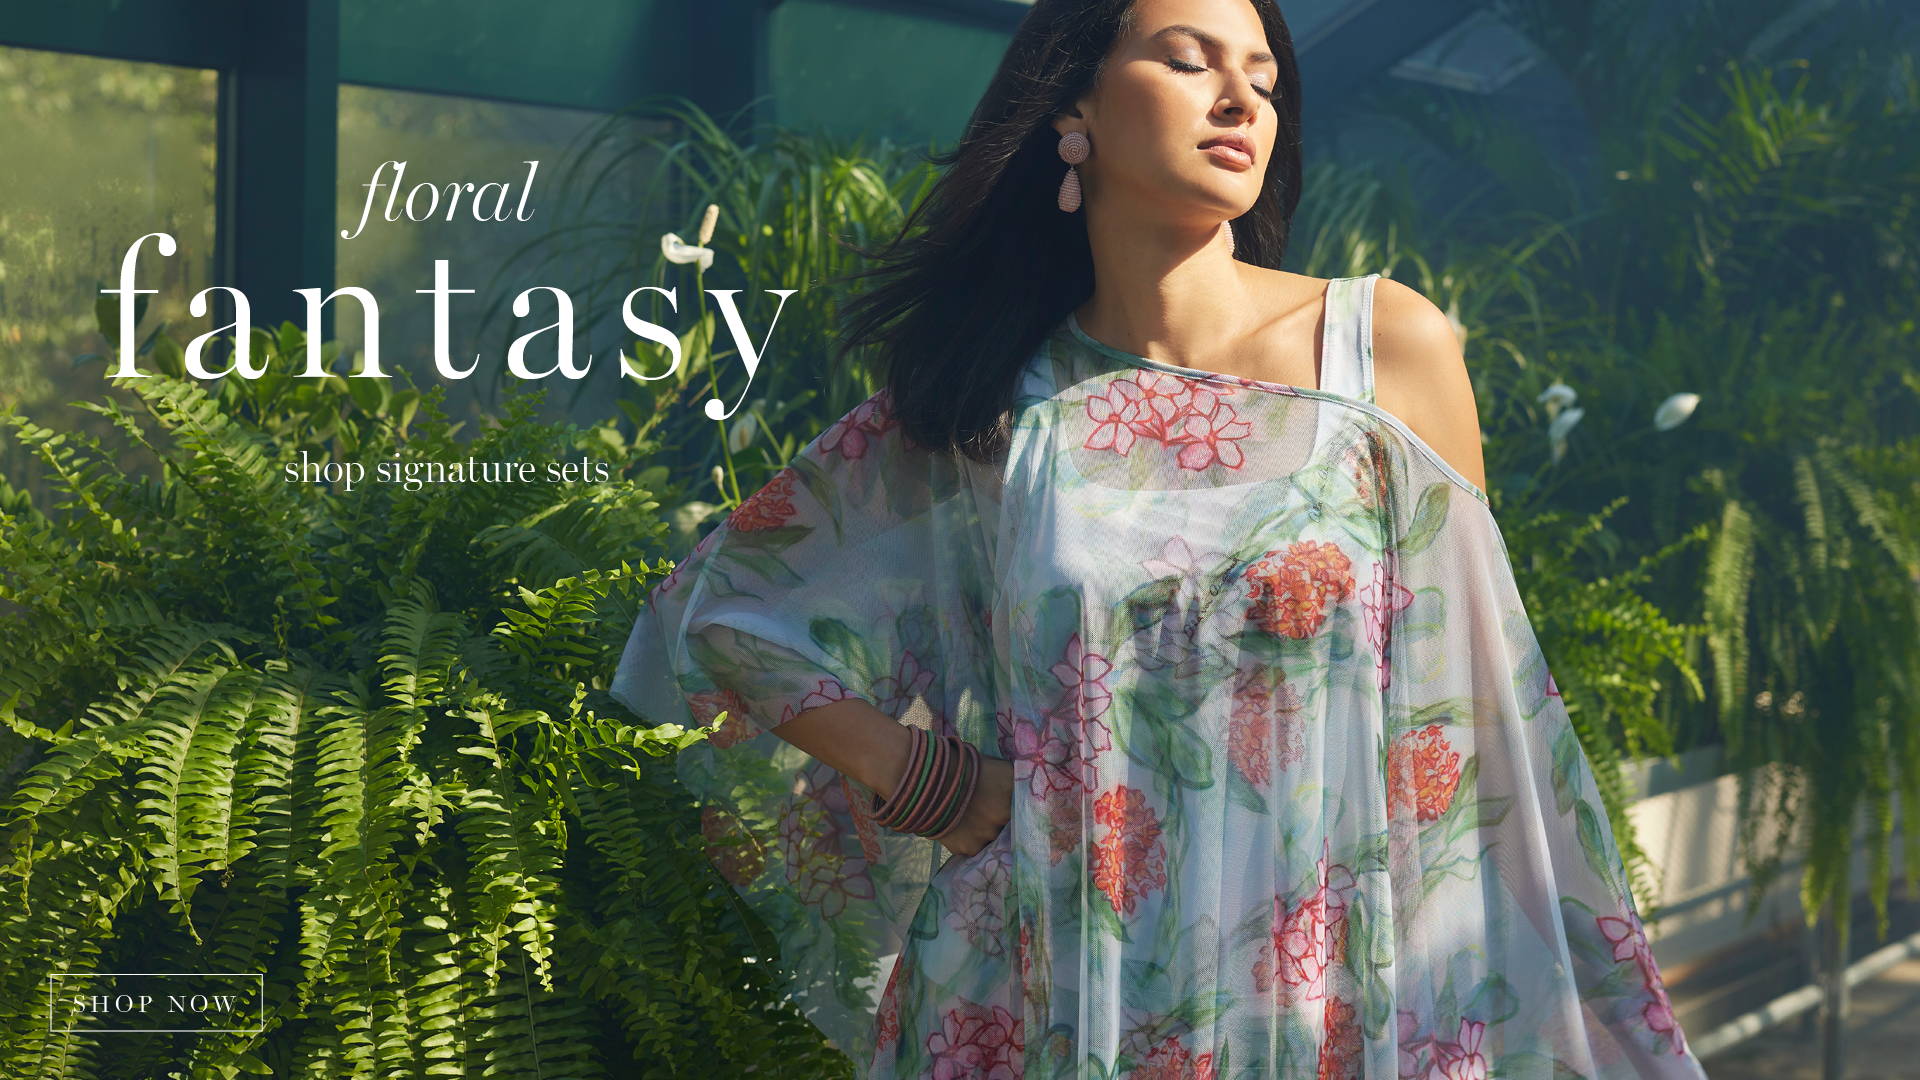 floral fantasy | Shop signature sets | Woman wearing floral mesh topper over tank top in a greenhouse for women's warm weather clothing